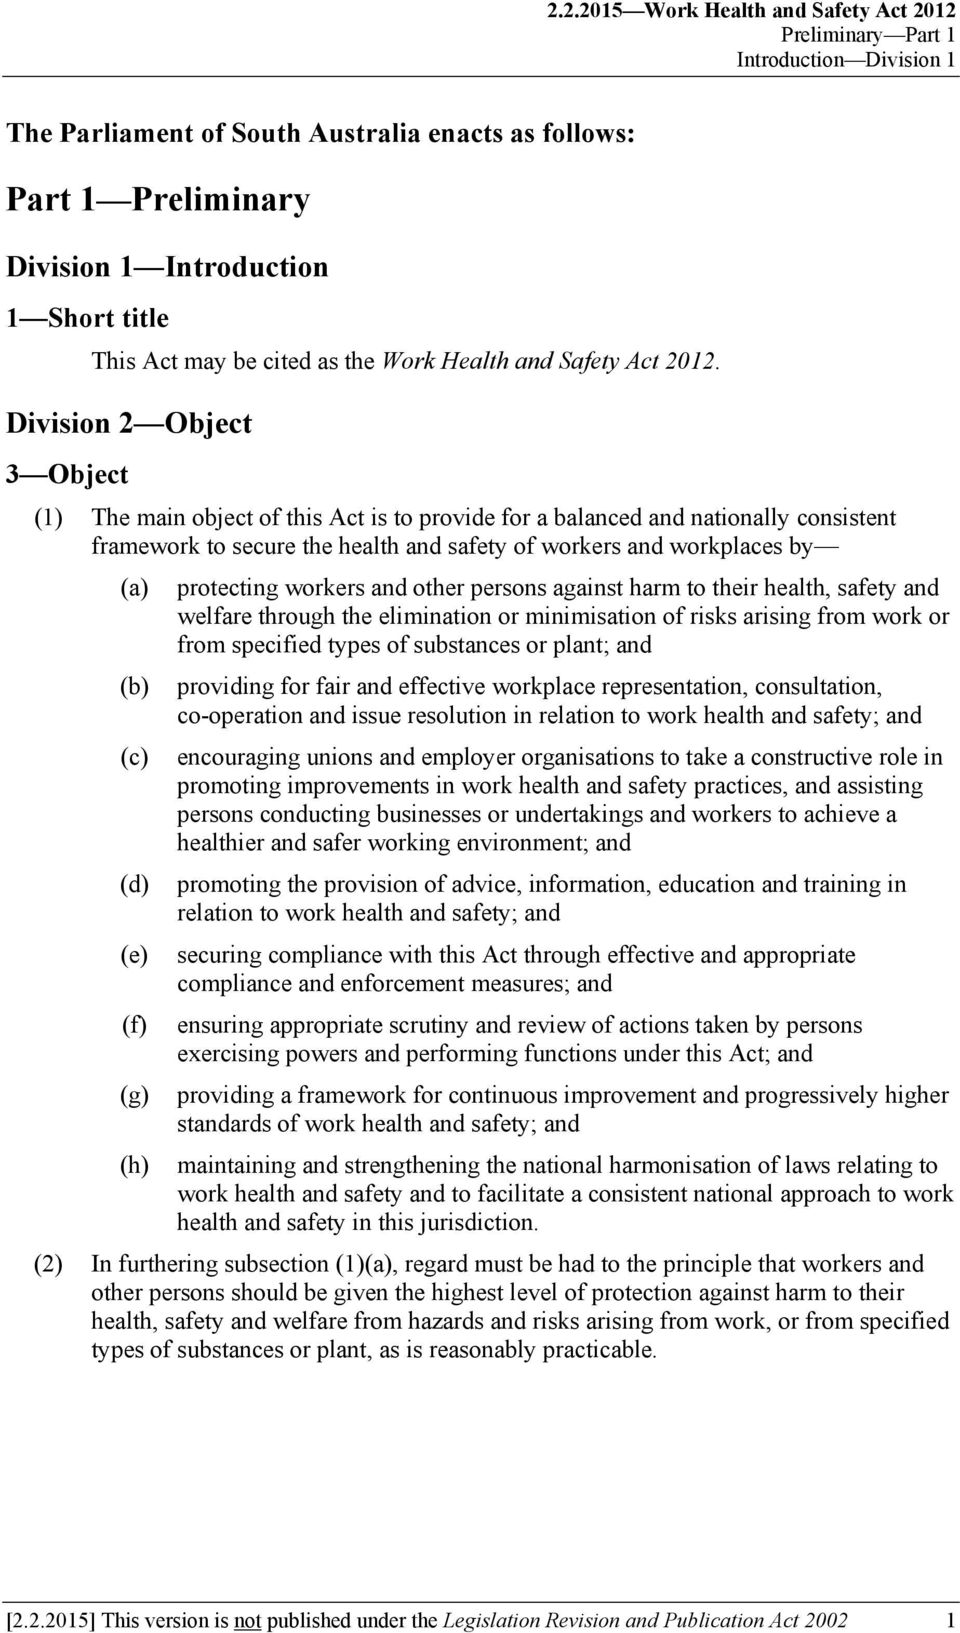 Division 2 Object 3 Object (1) The main object of this Act is to provide for a balanced and nationally consistent framework to secure the health and safety of workers and workplaces by protecting